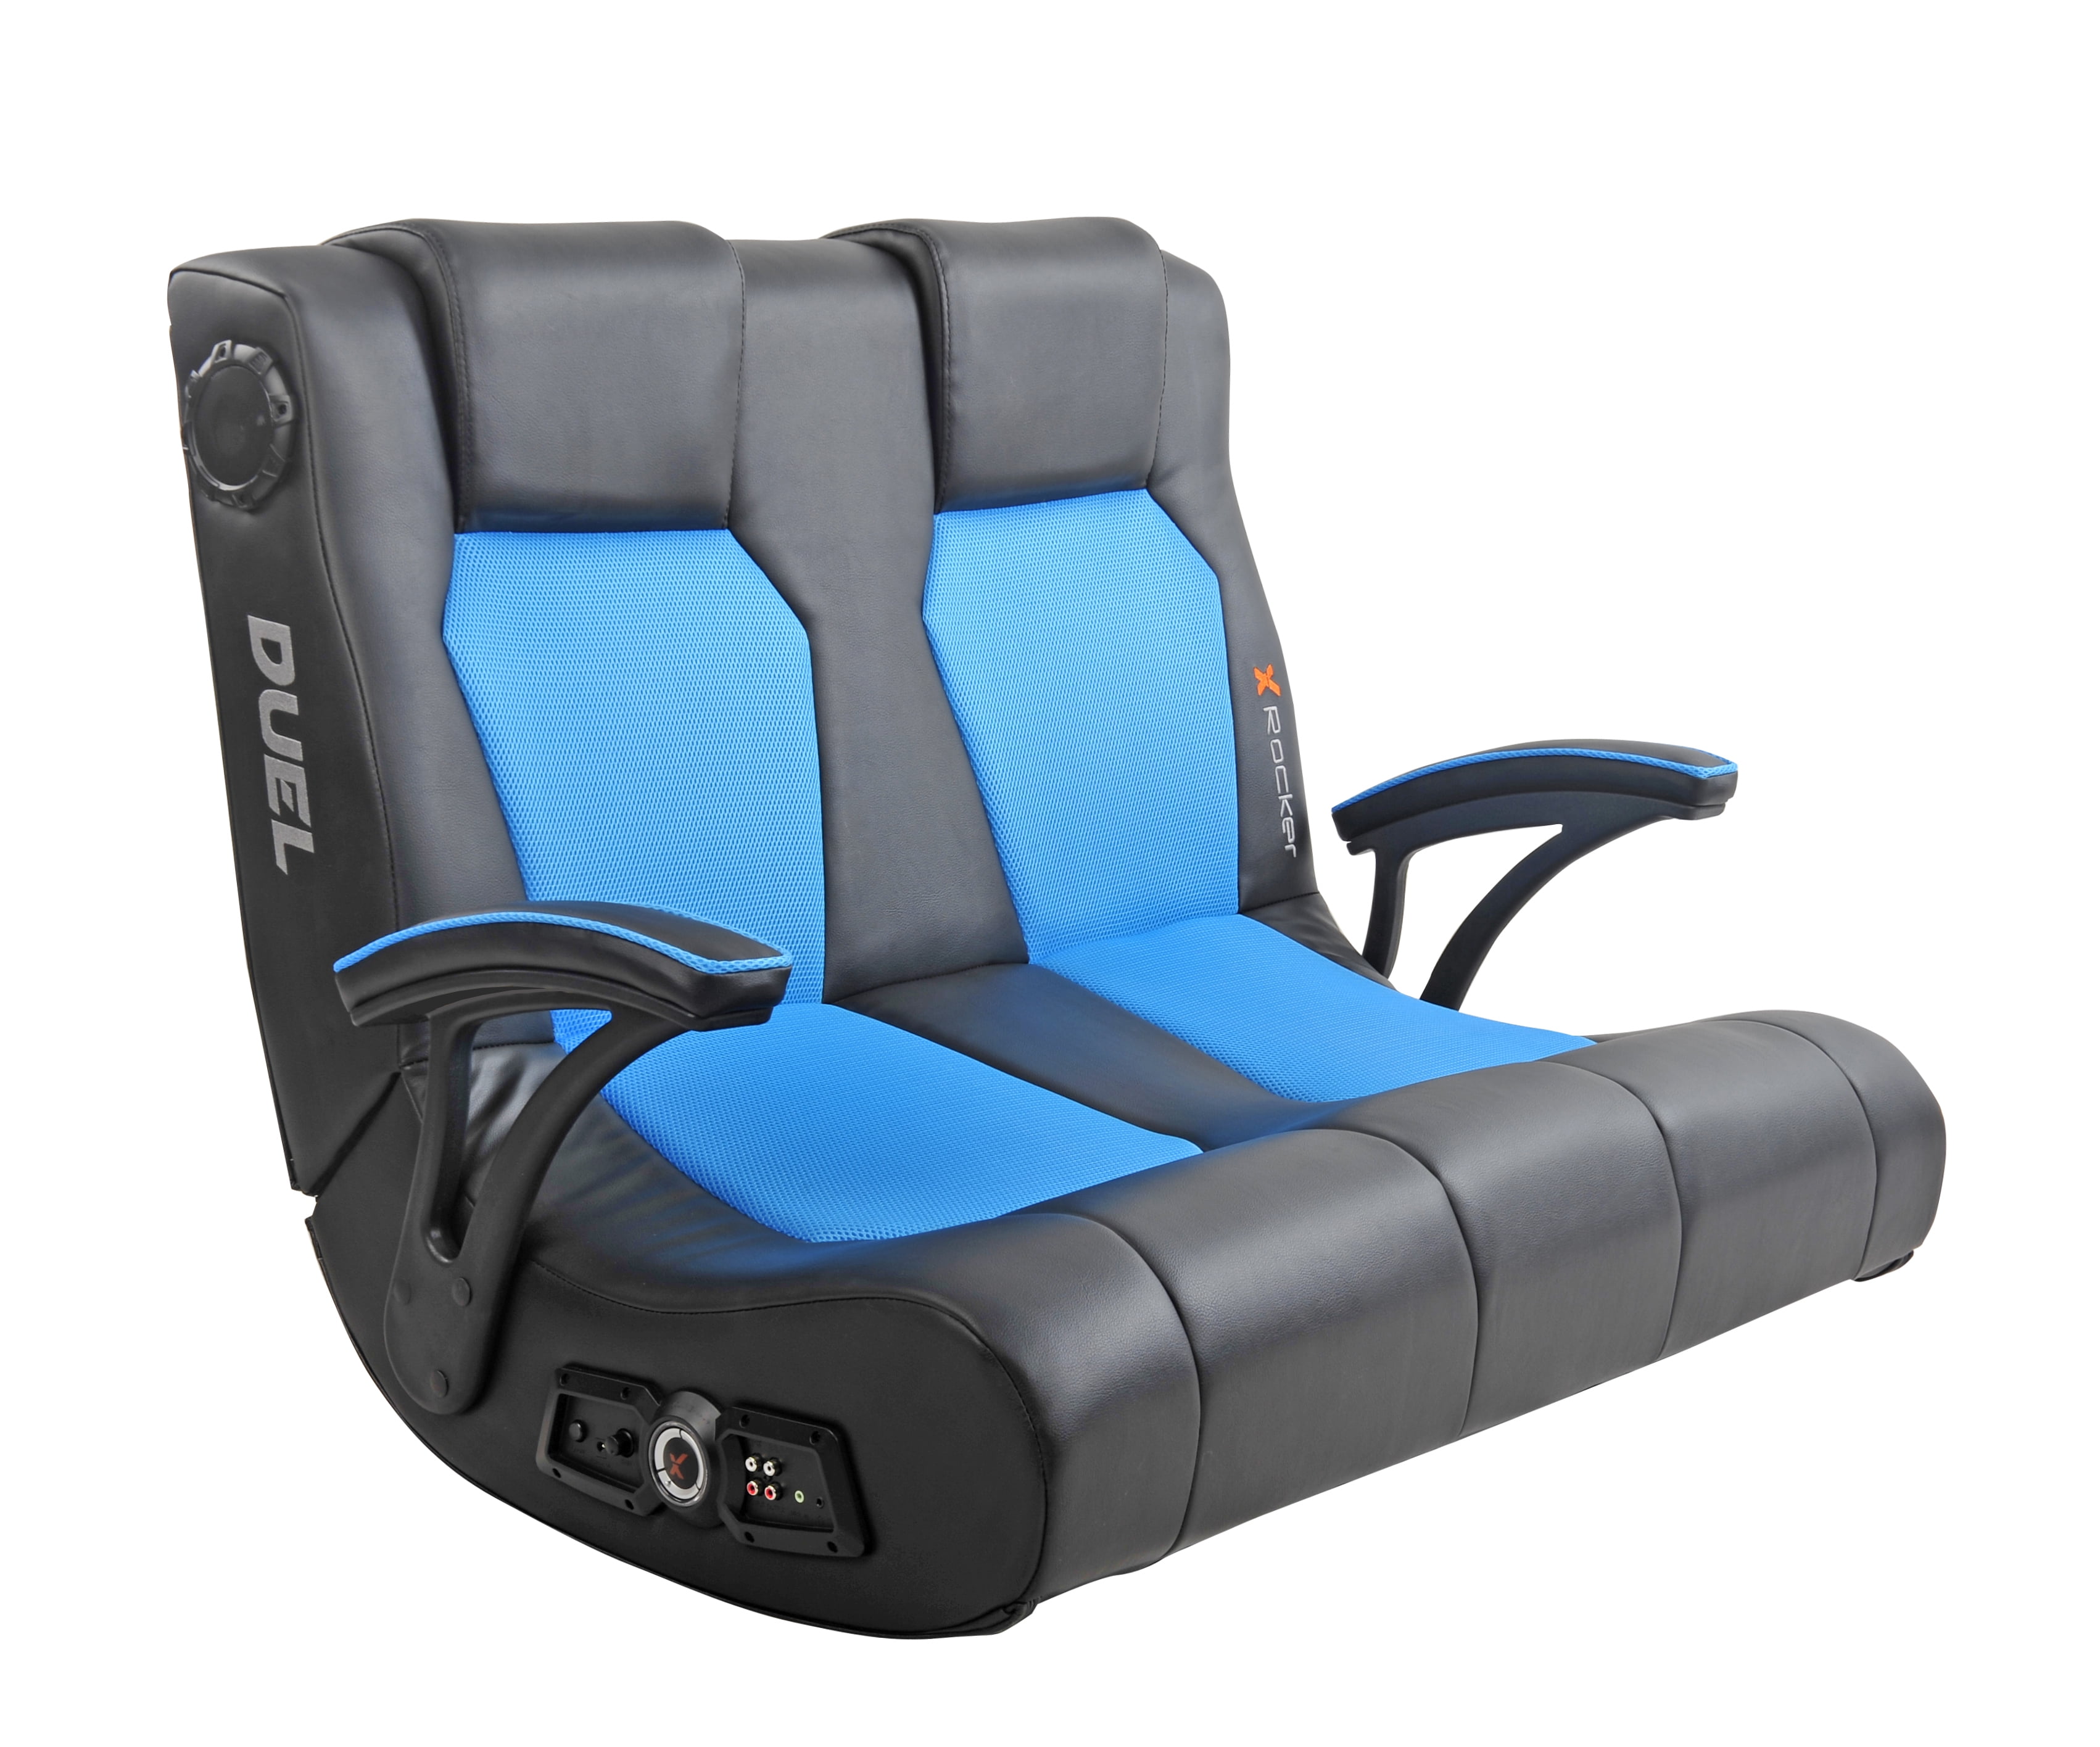 X Rocker Dual Commander Gaming Chair - Available in Multiple Colors